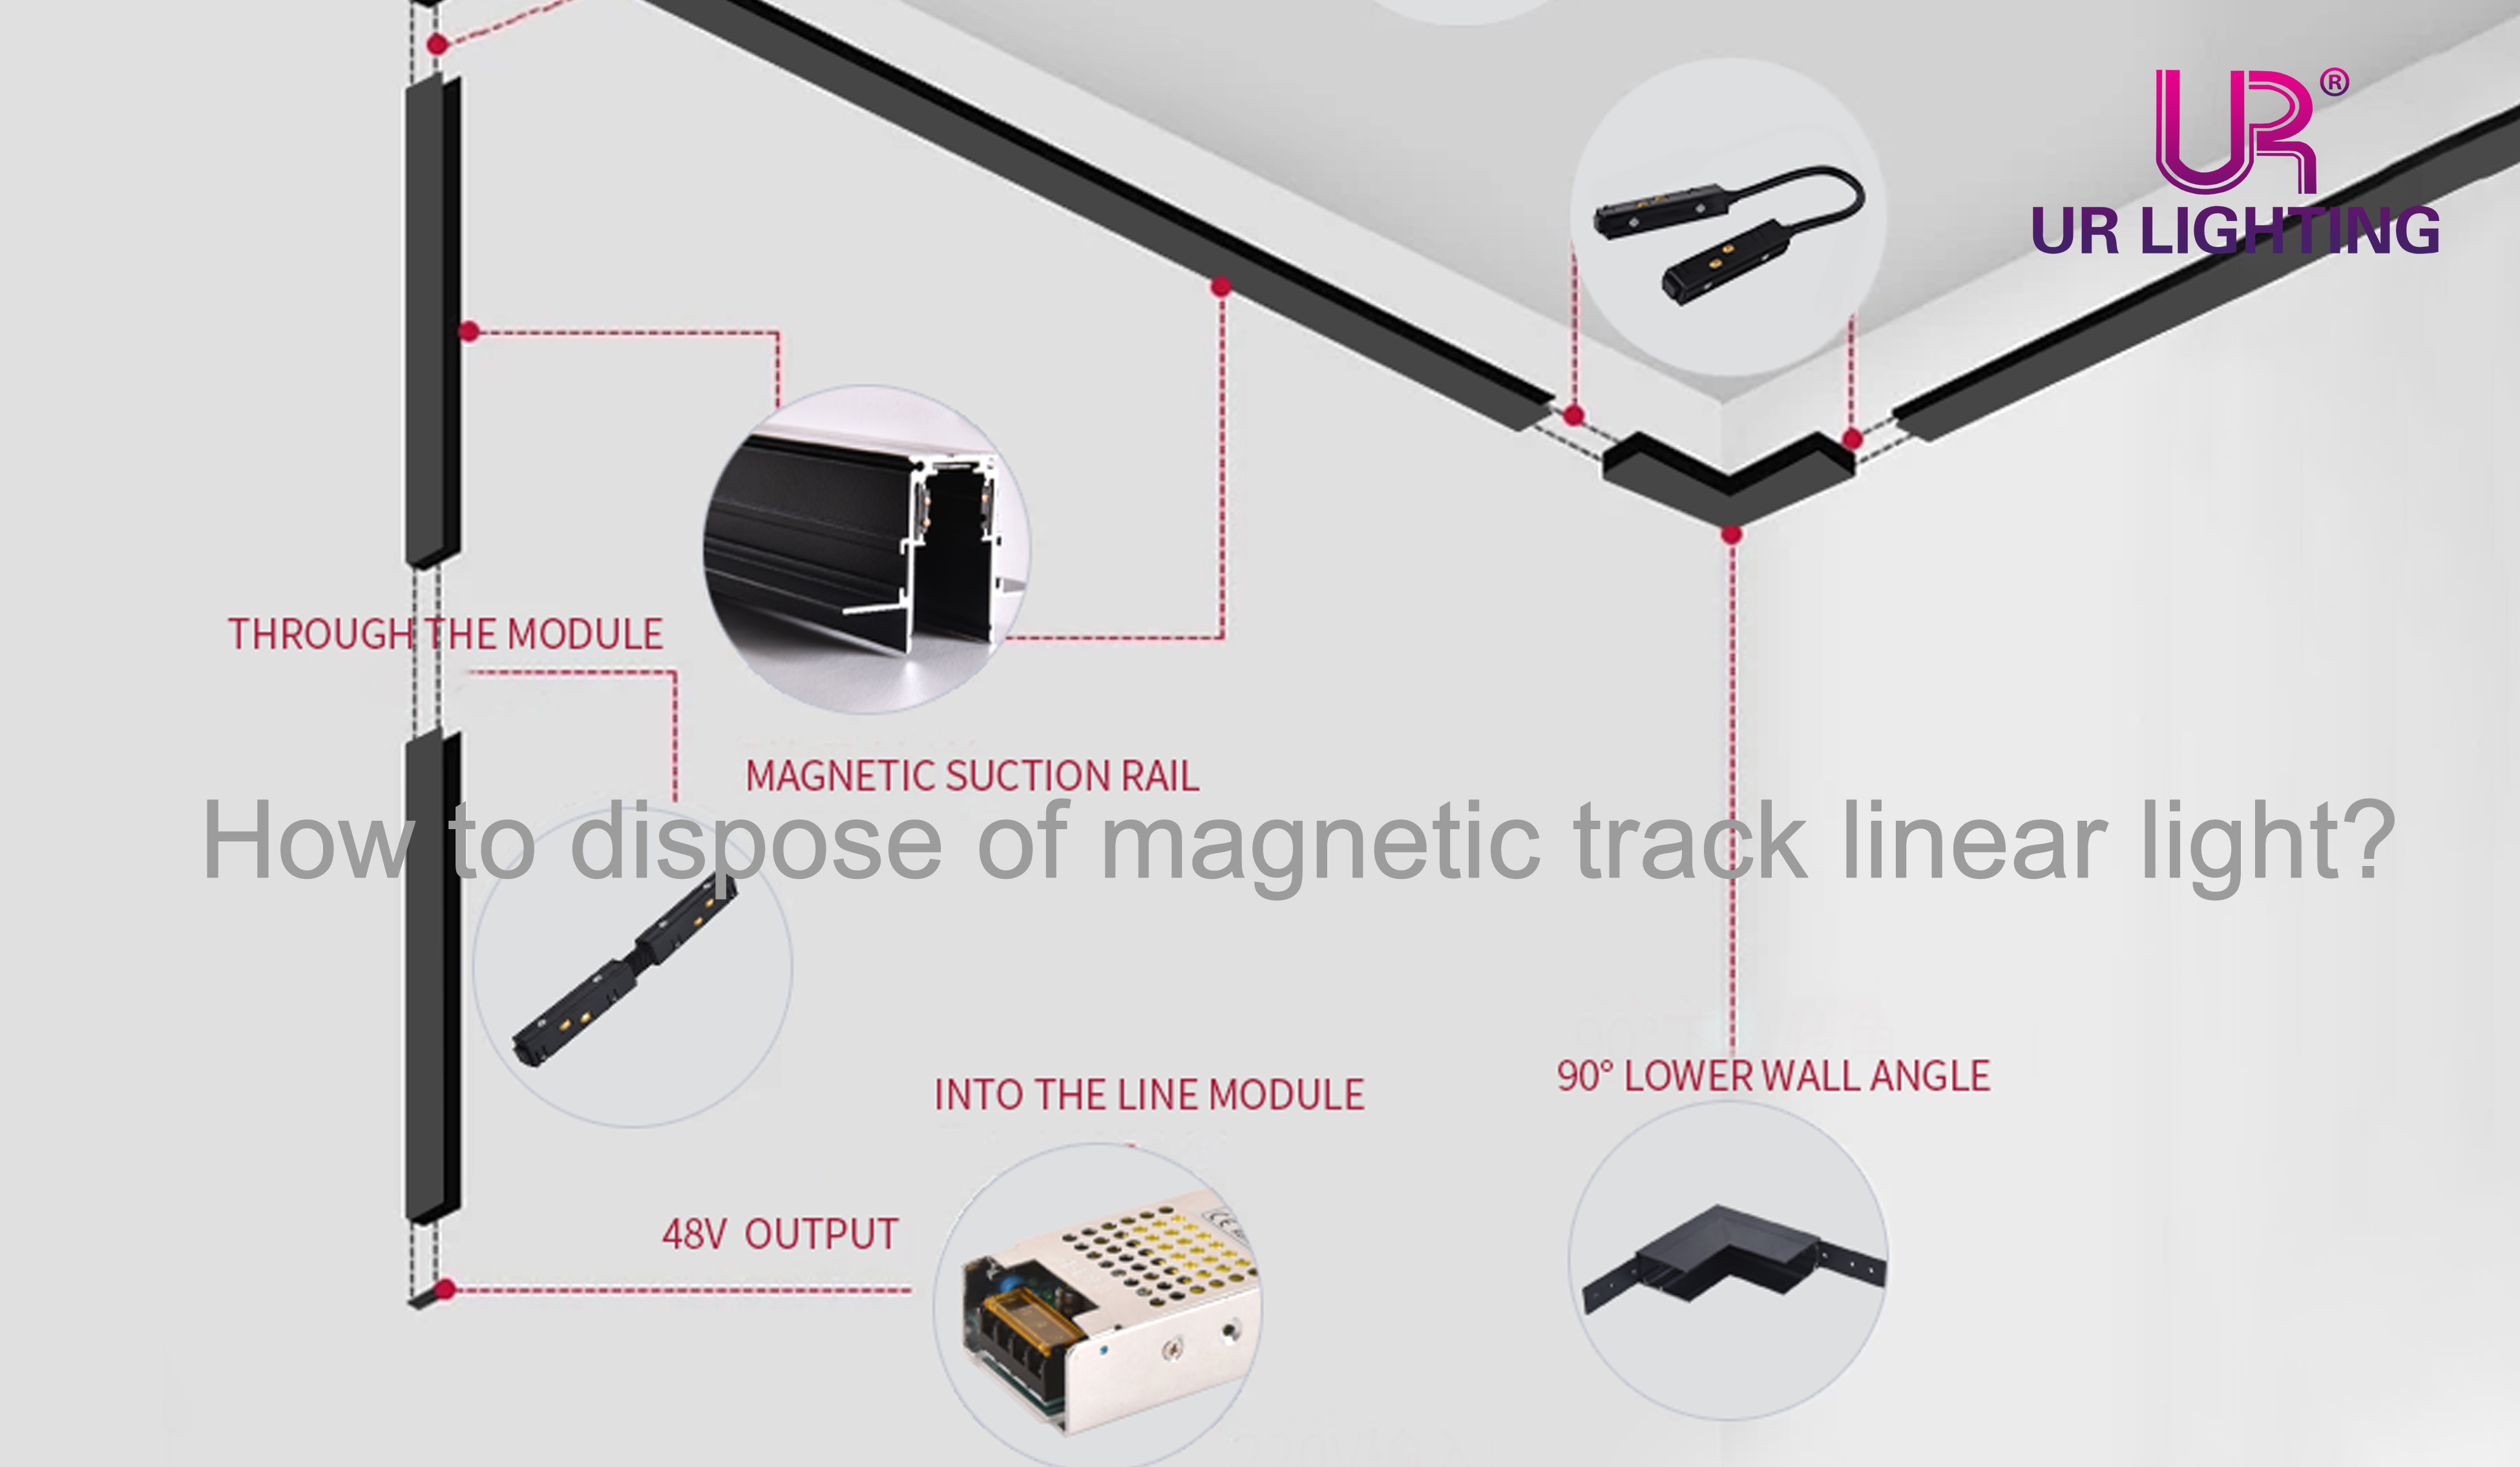 How to dispose of magnetic track linear light?